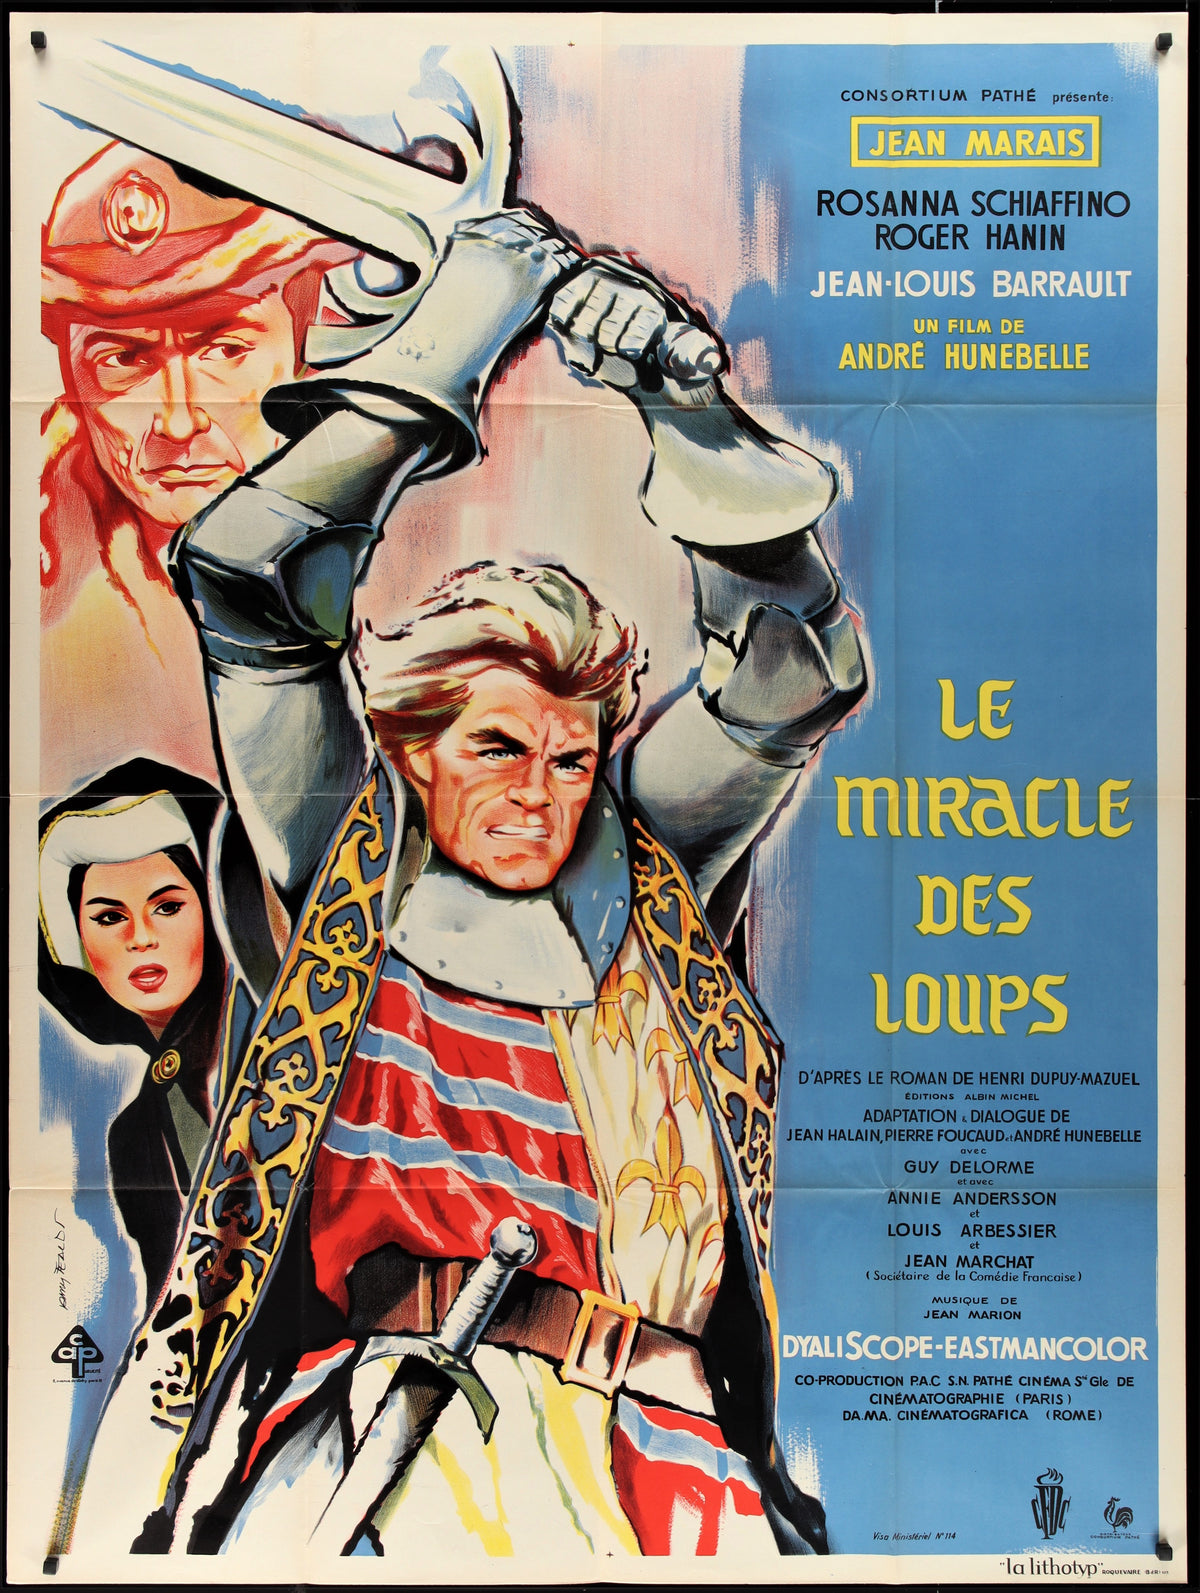 Blood on his Sword - Authentic Vintage Poster